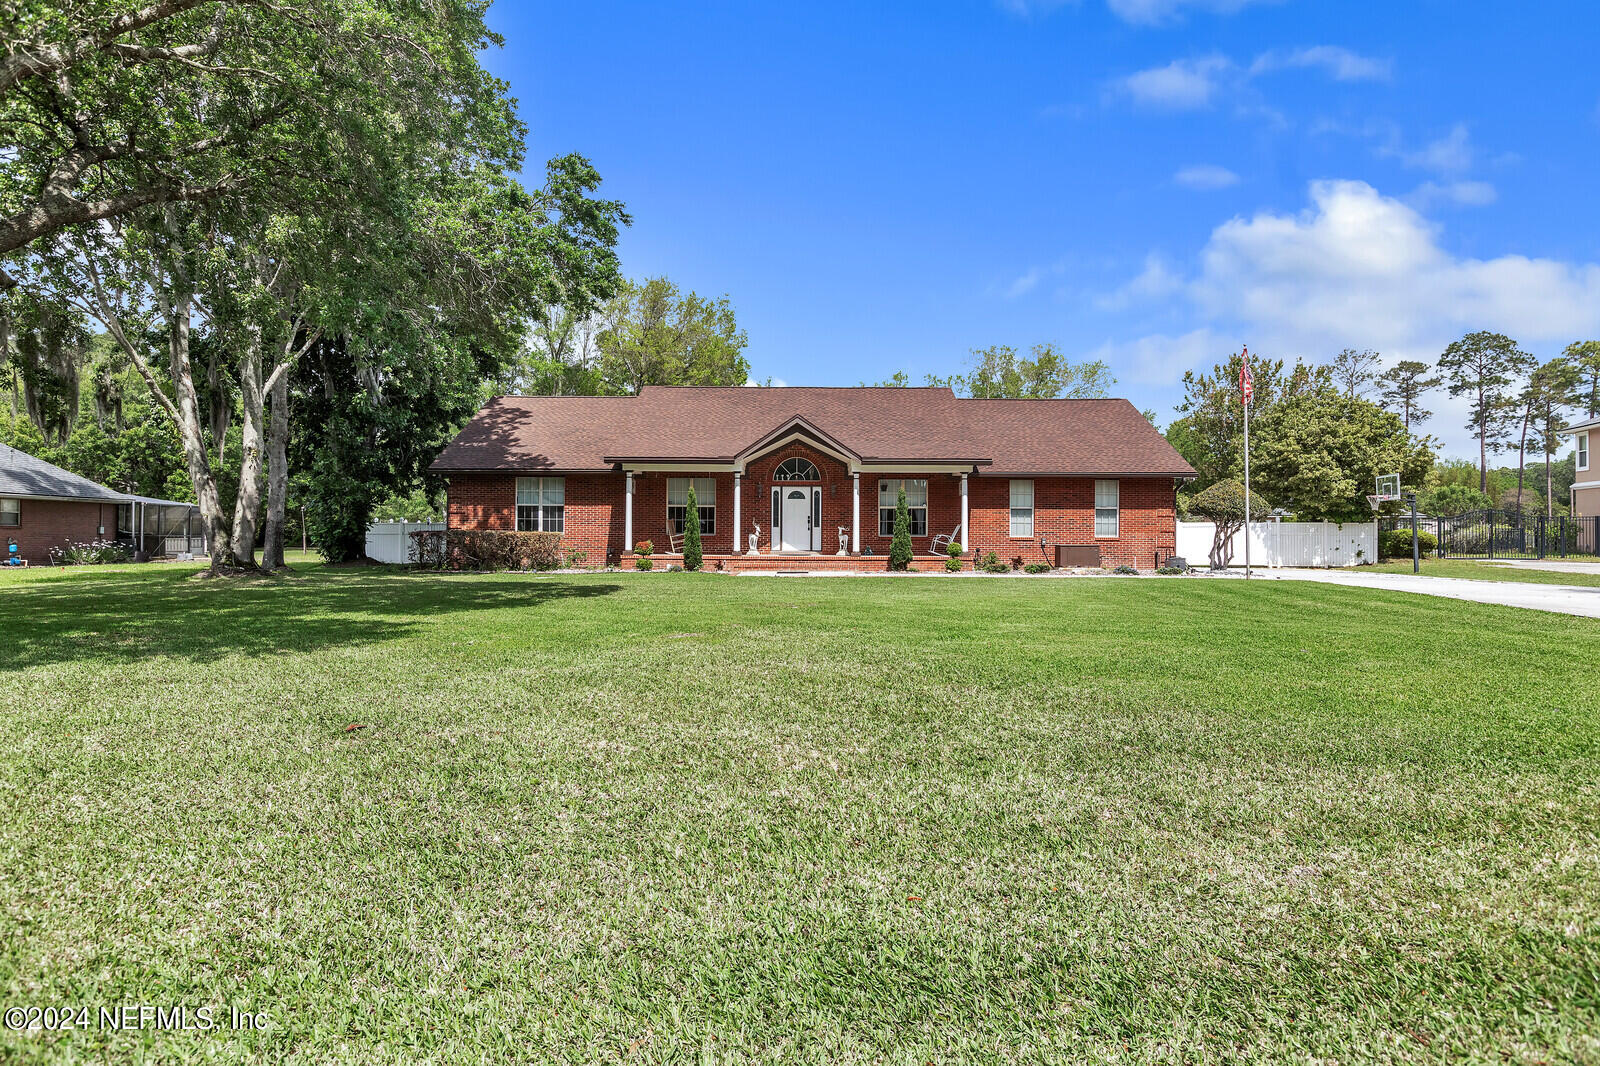 St Johns, FL home for sale located at 1704 Southcreek Drive, St Johns, FL 32259